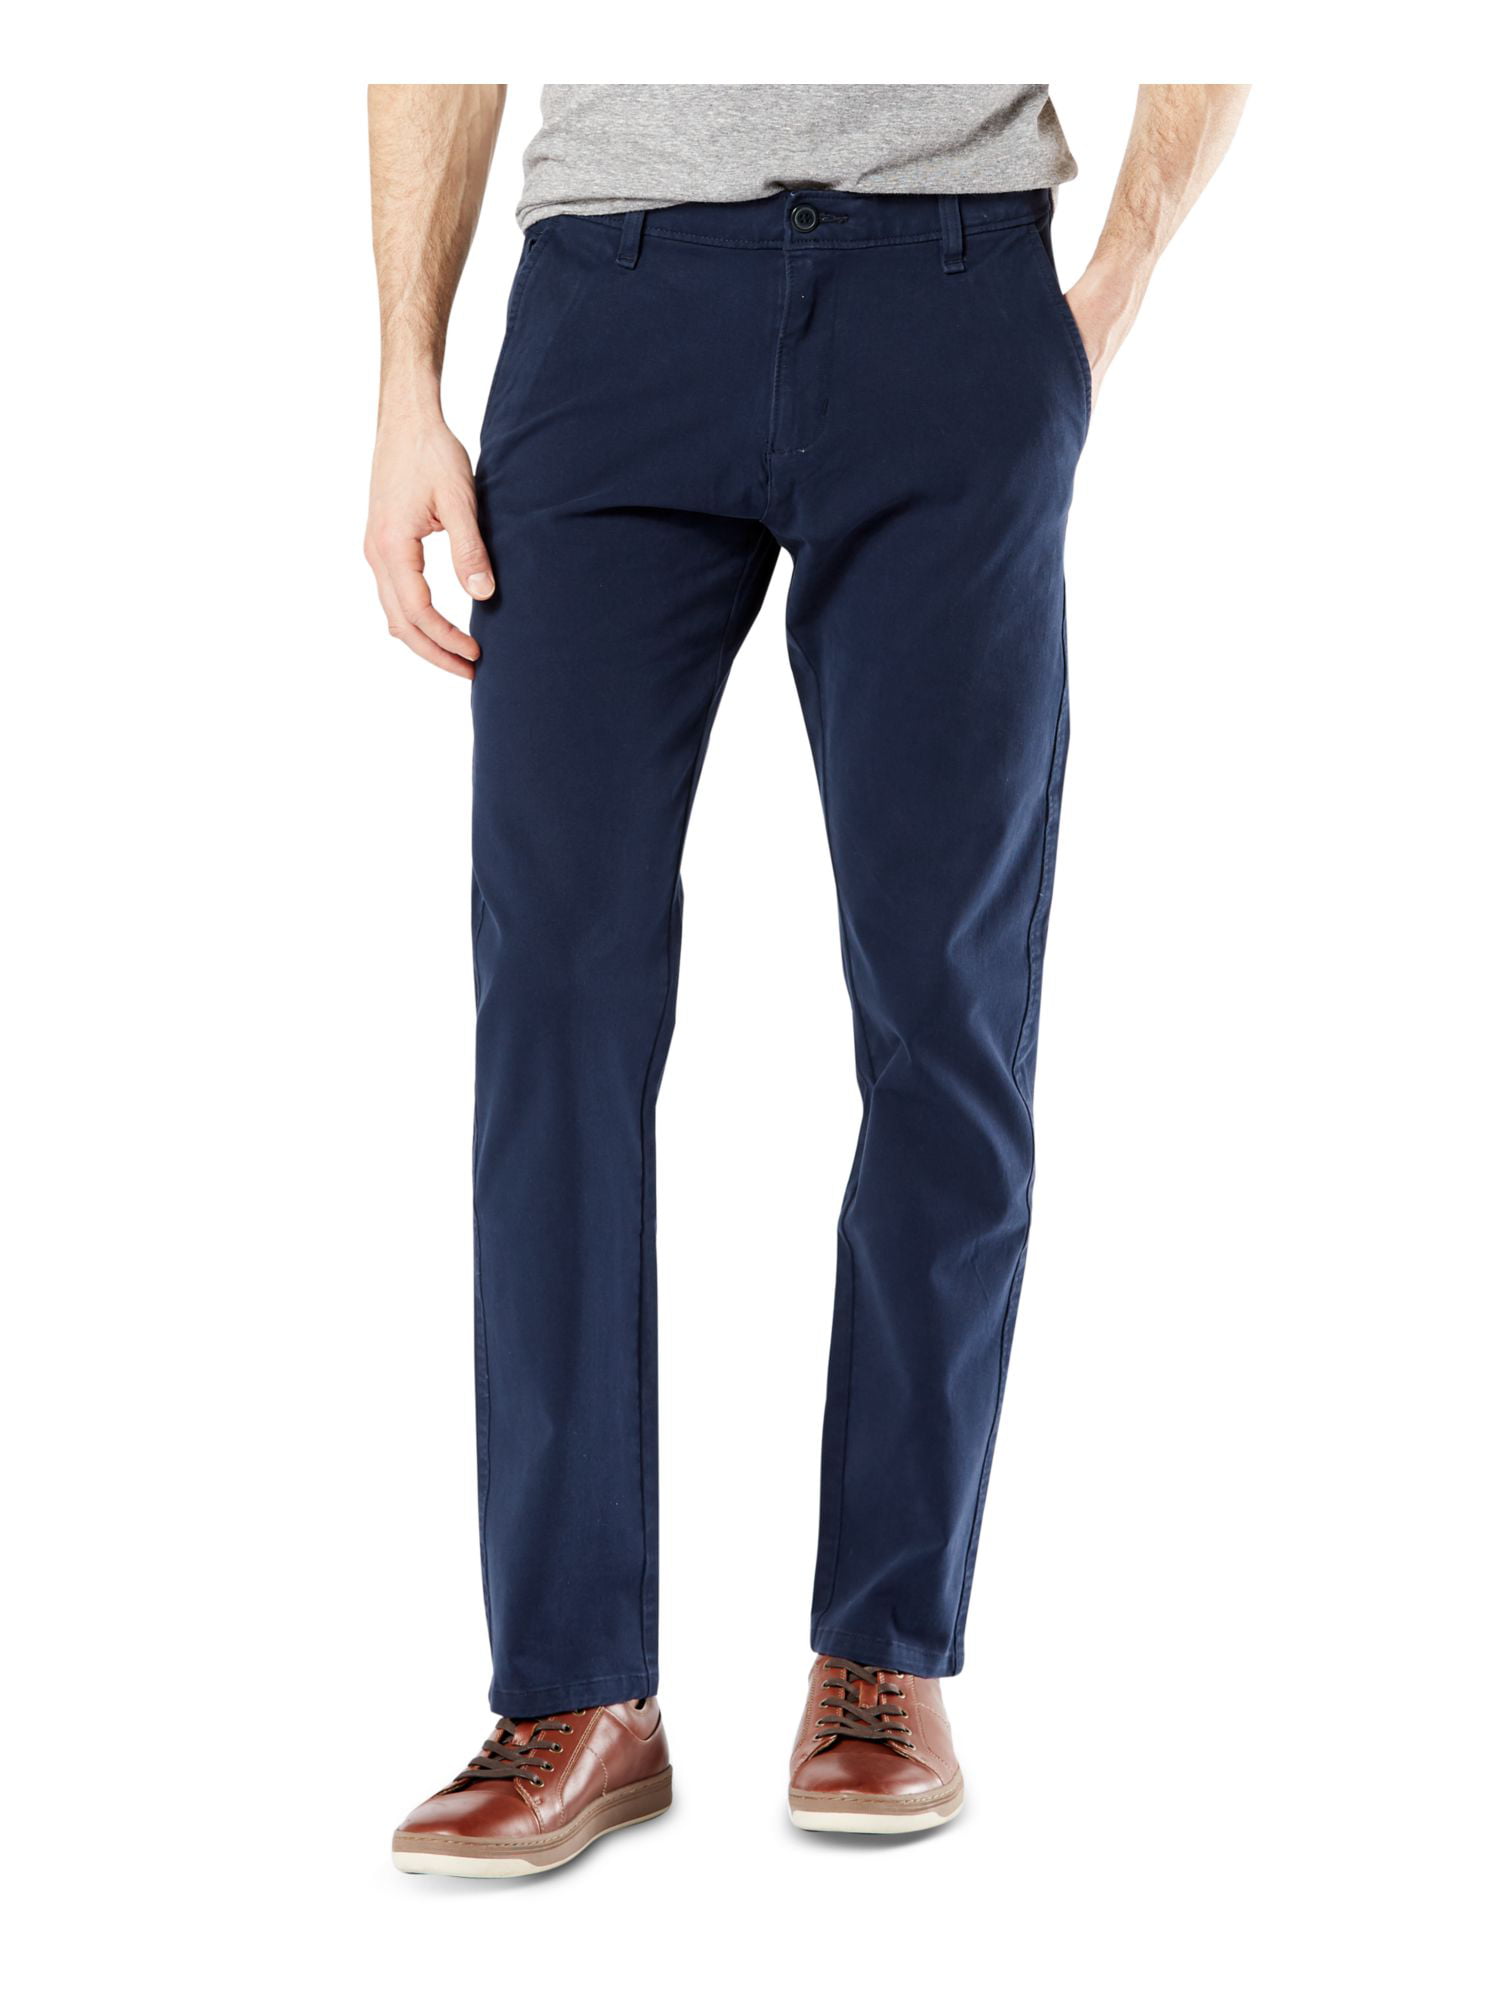 DOCKERS Mens Navy Tapered, Slim Fit Chino Pants W44\L34 